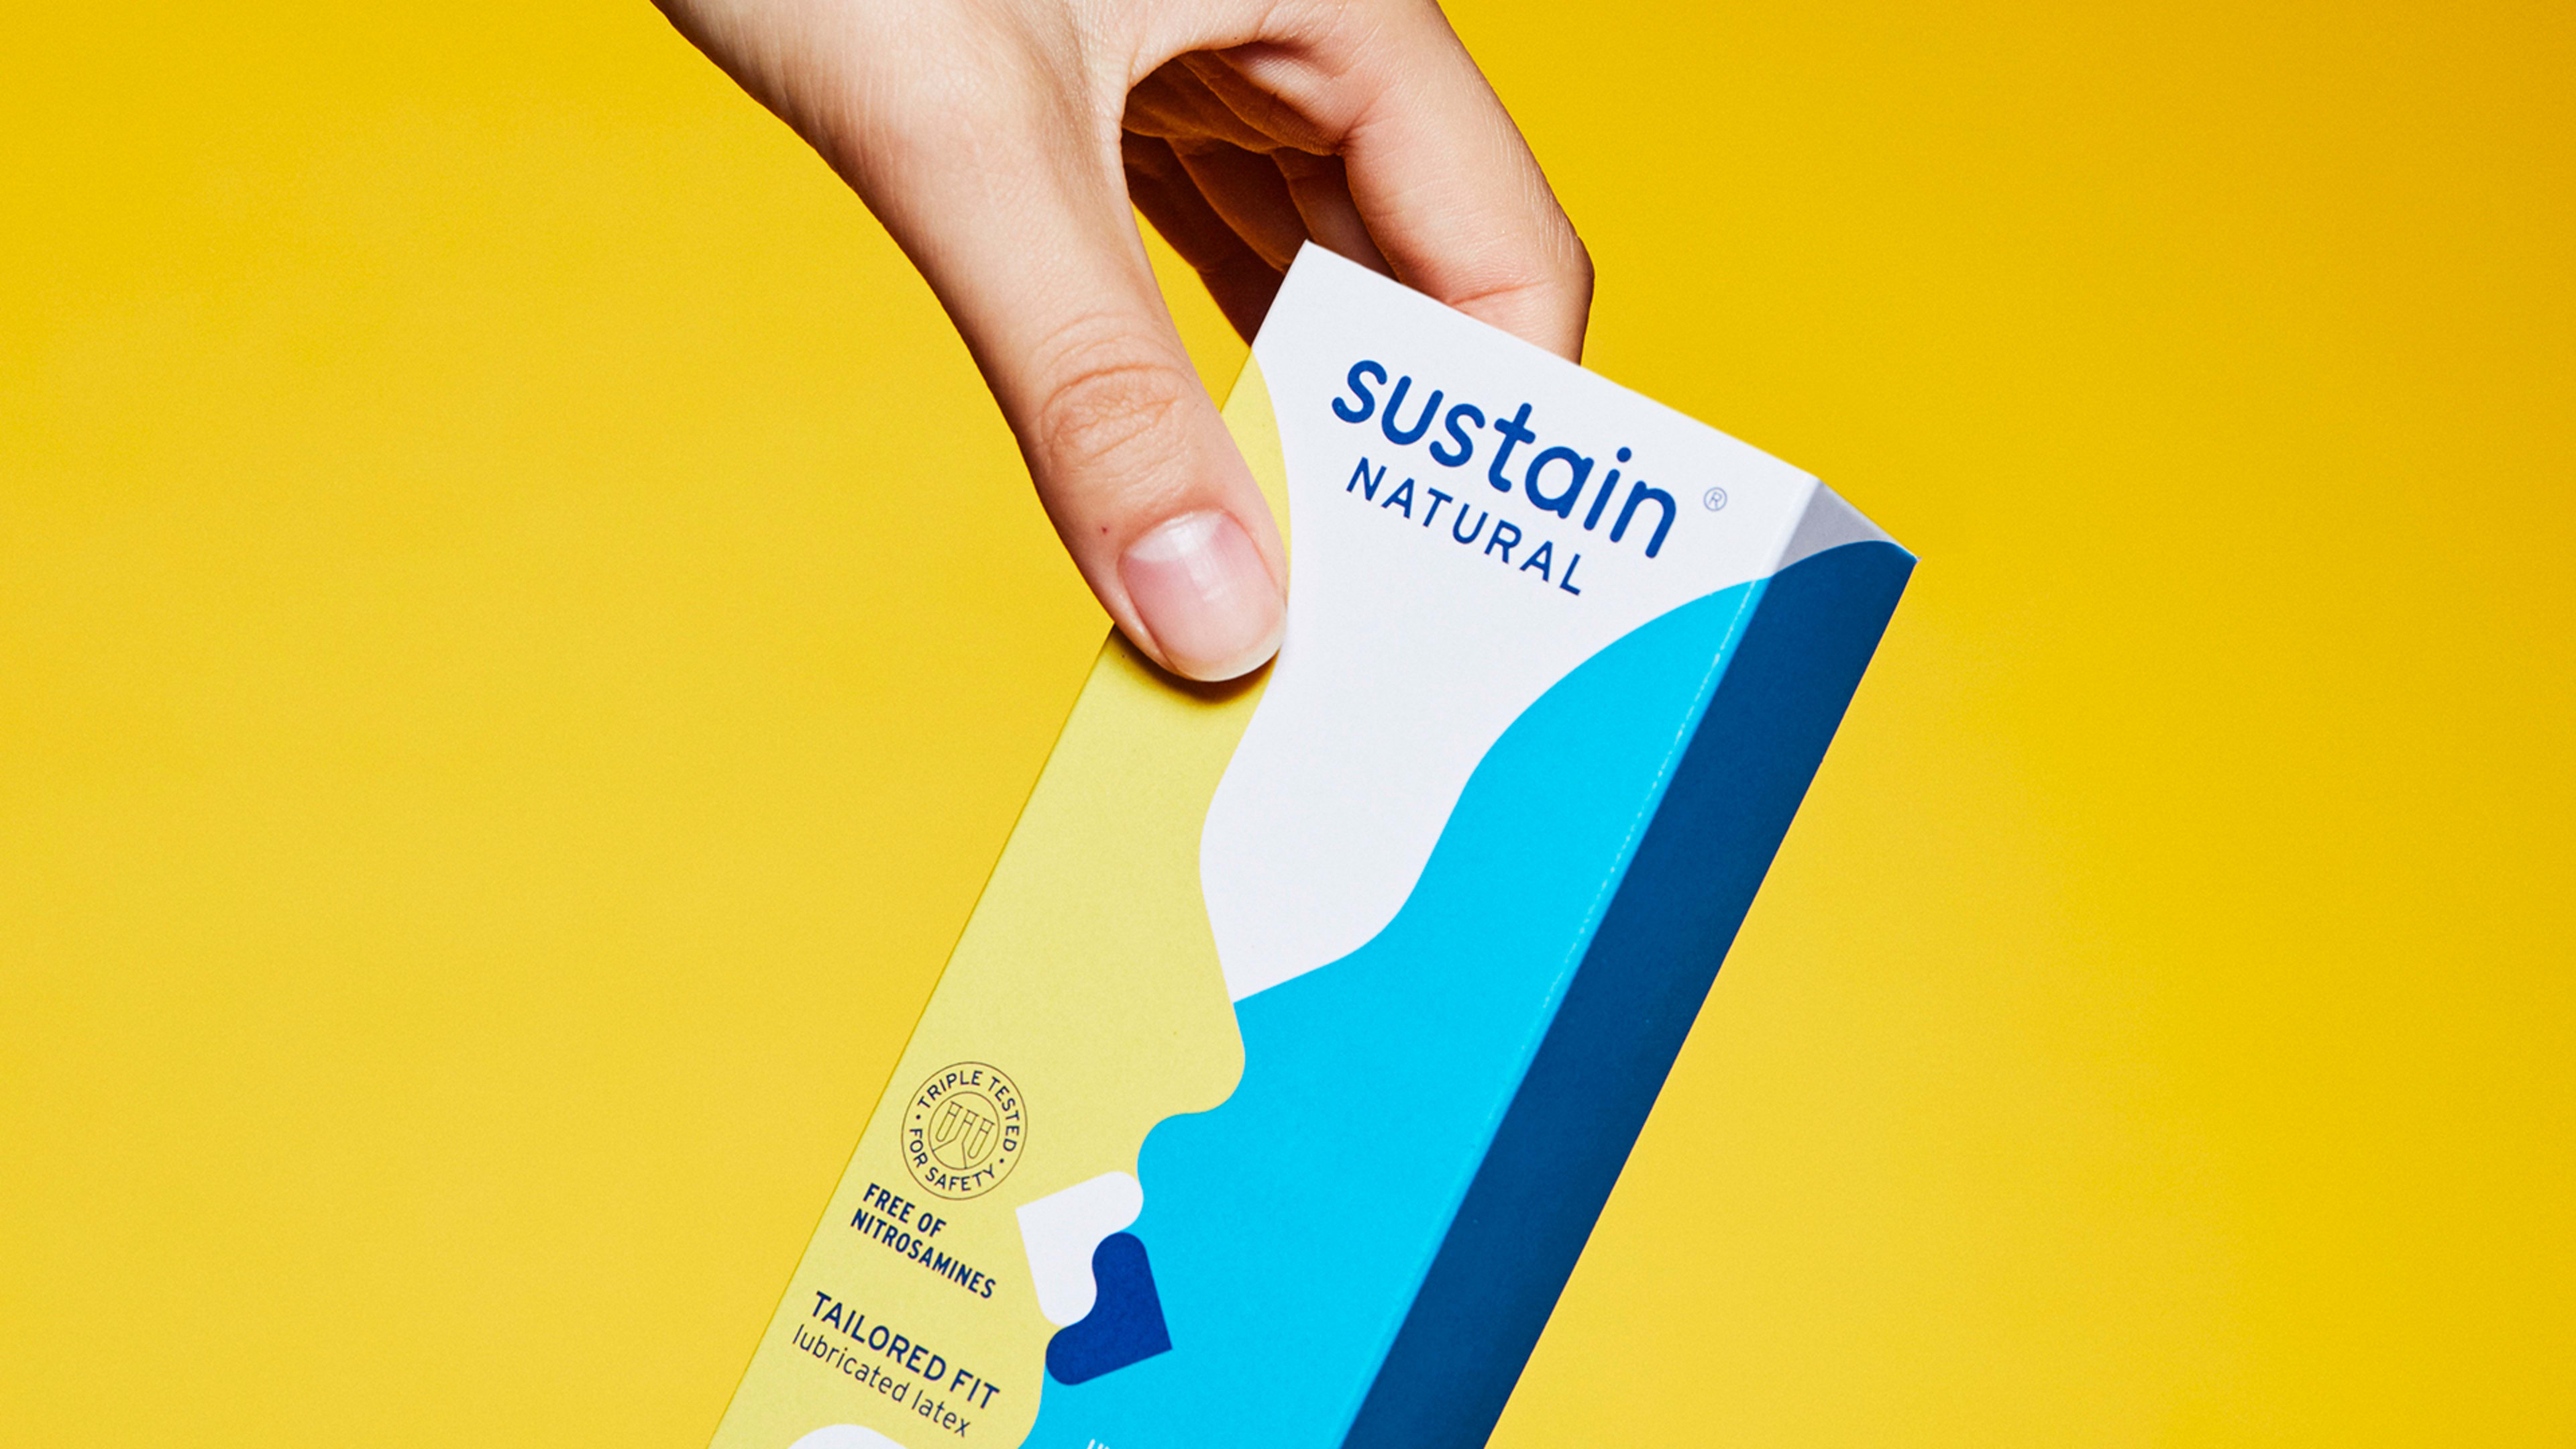 Haven’t made a pre-V-Day condom run yet? Sustain’s got you covered